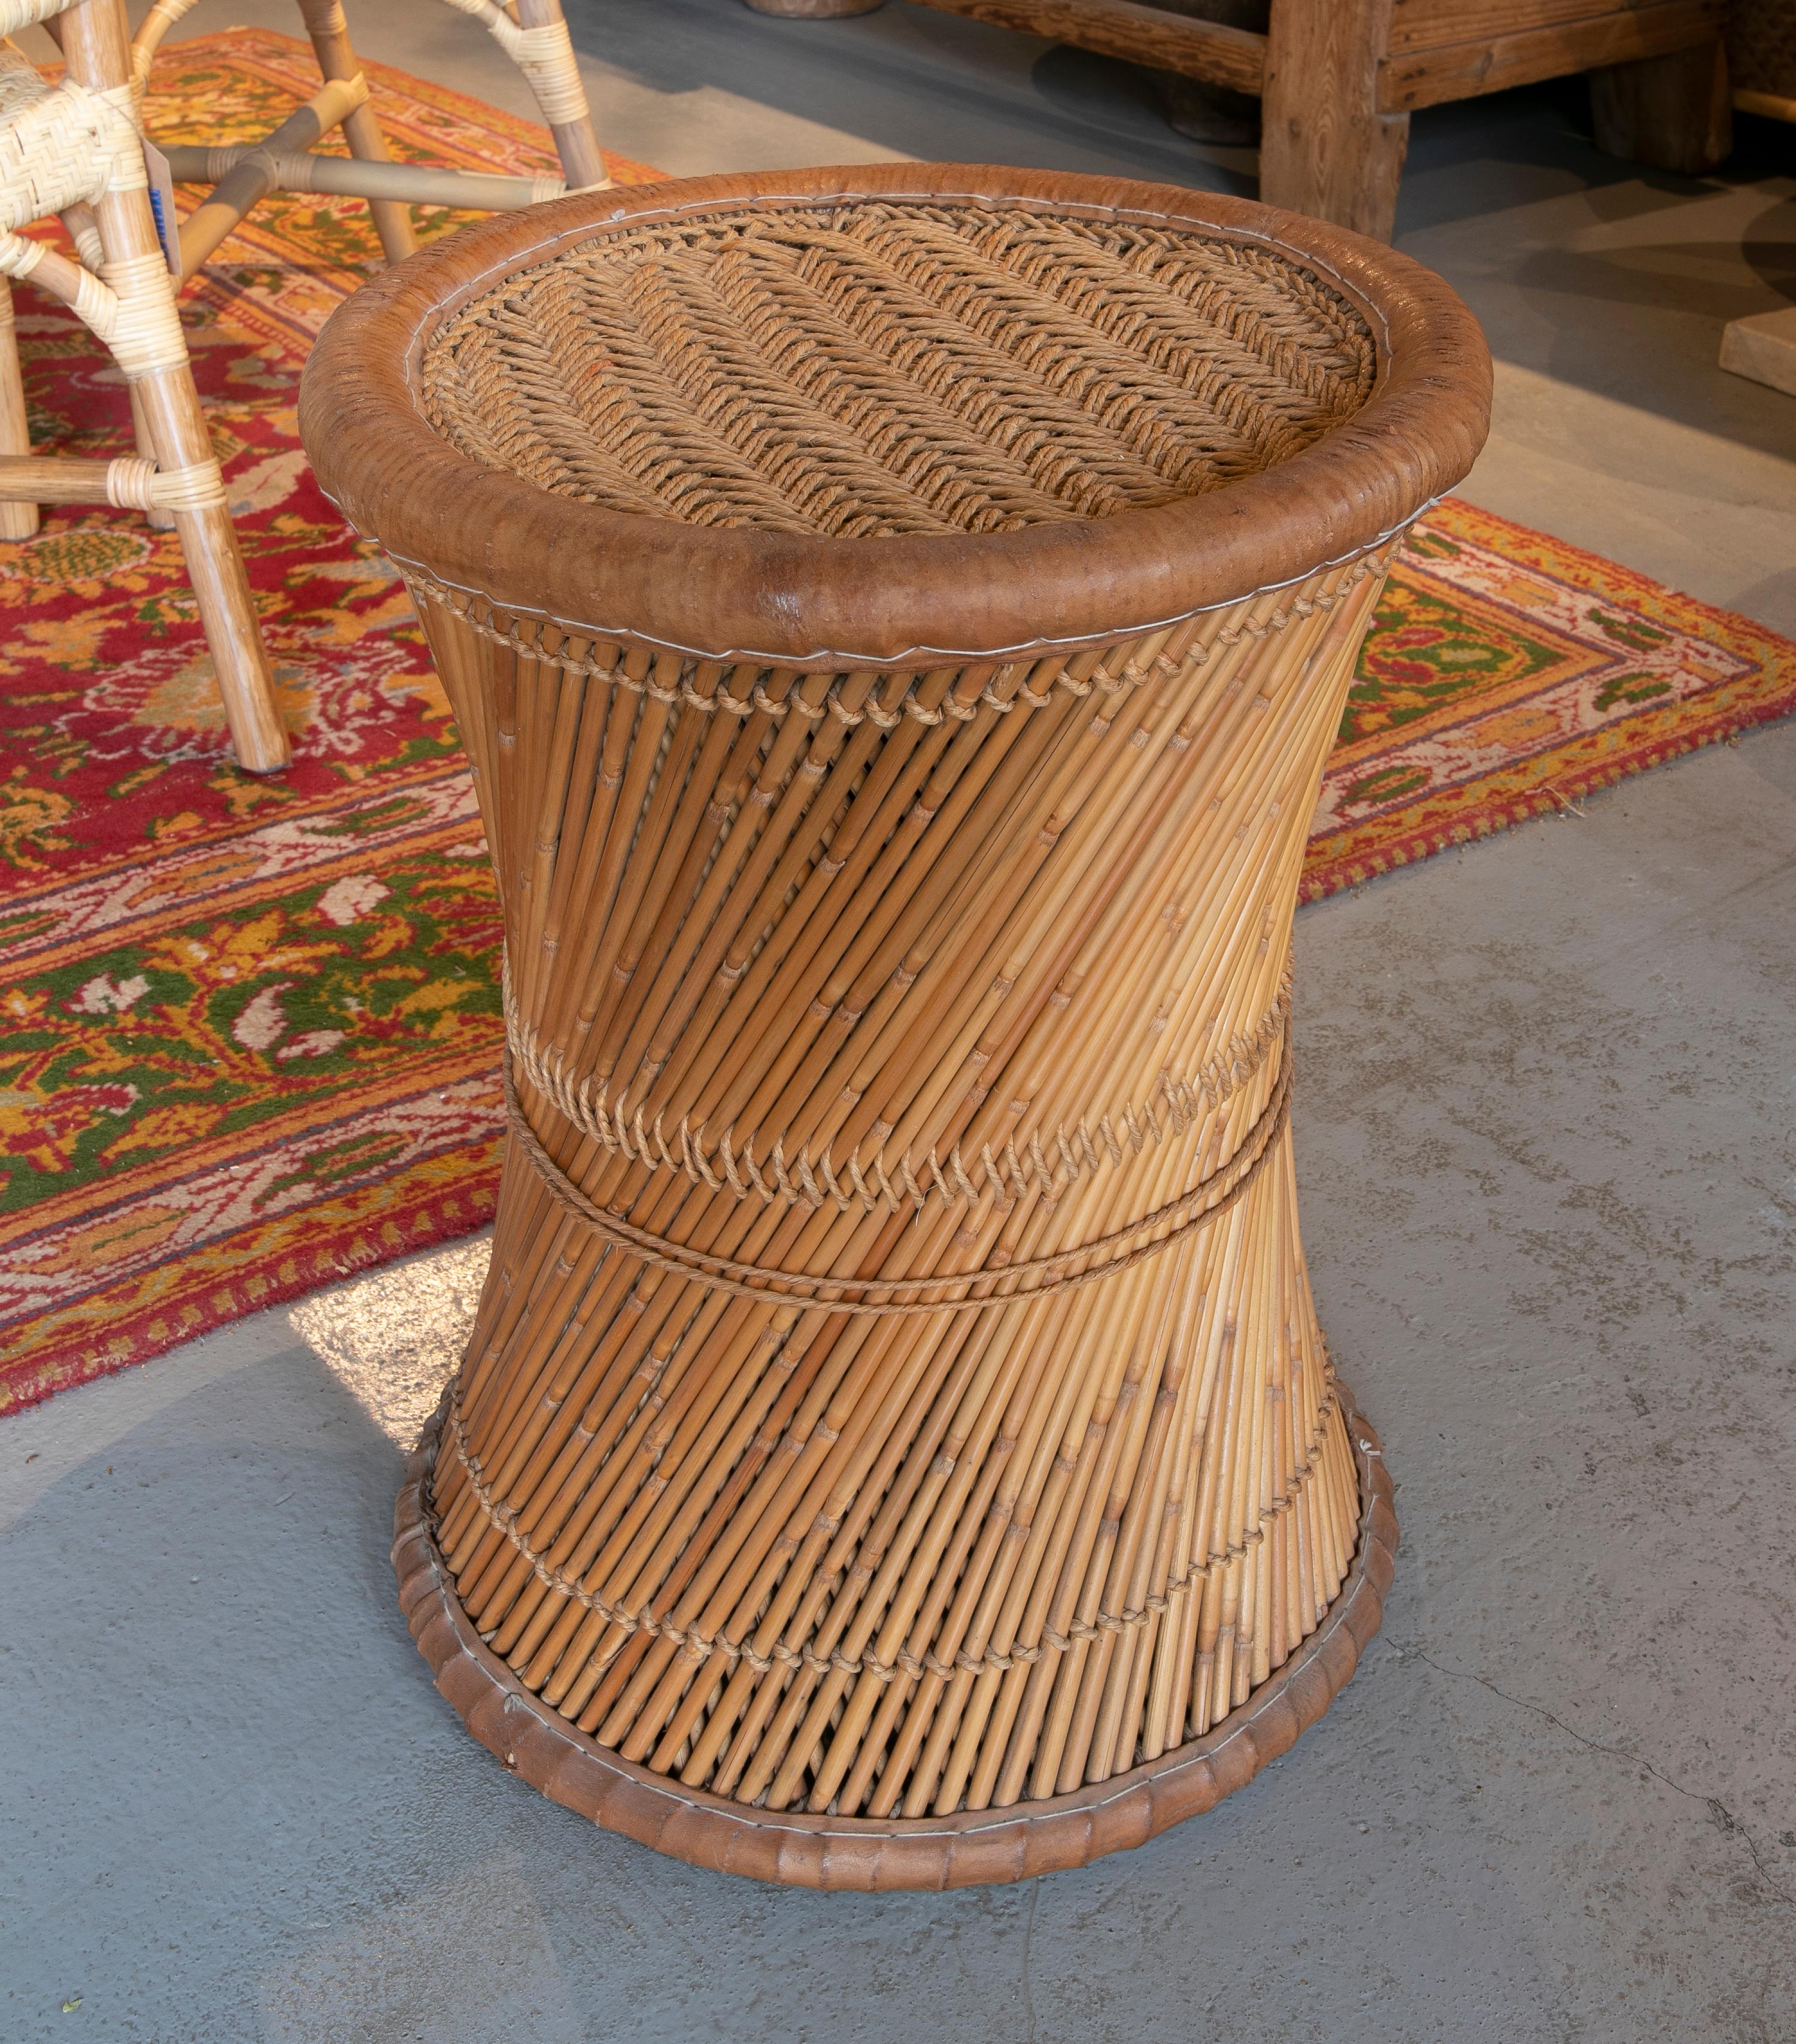 Wicker and leather stool handmade with round shape